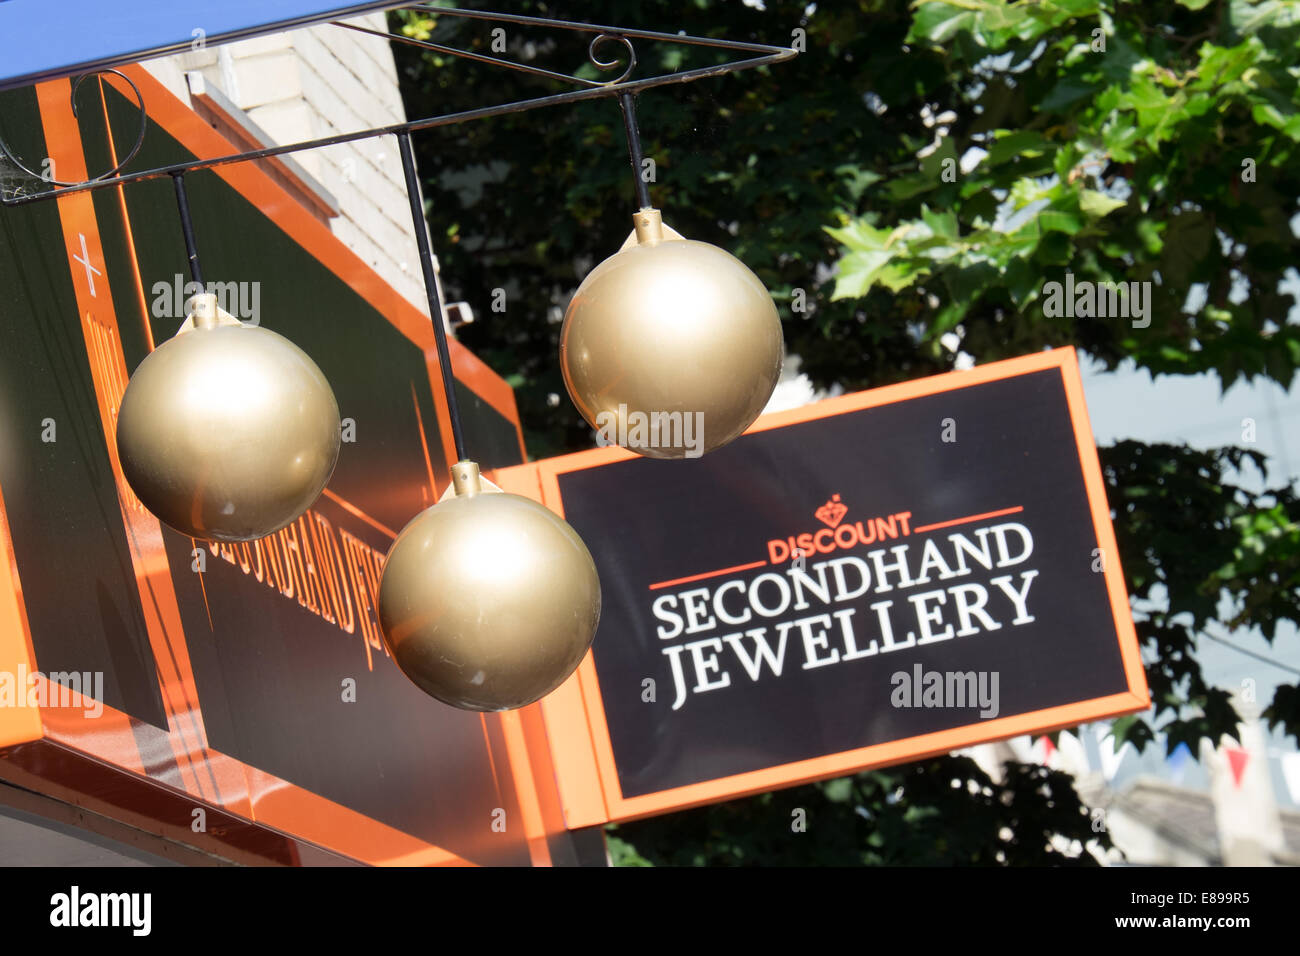 Three golden balls sign hanging outside a high street pawn shop & secondnand jewelry store in Swindon, Wiltshire, UK Stock Photo